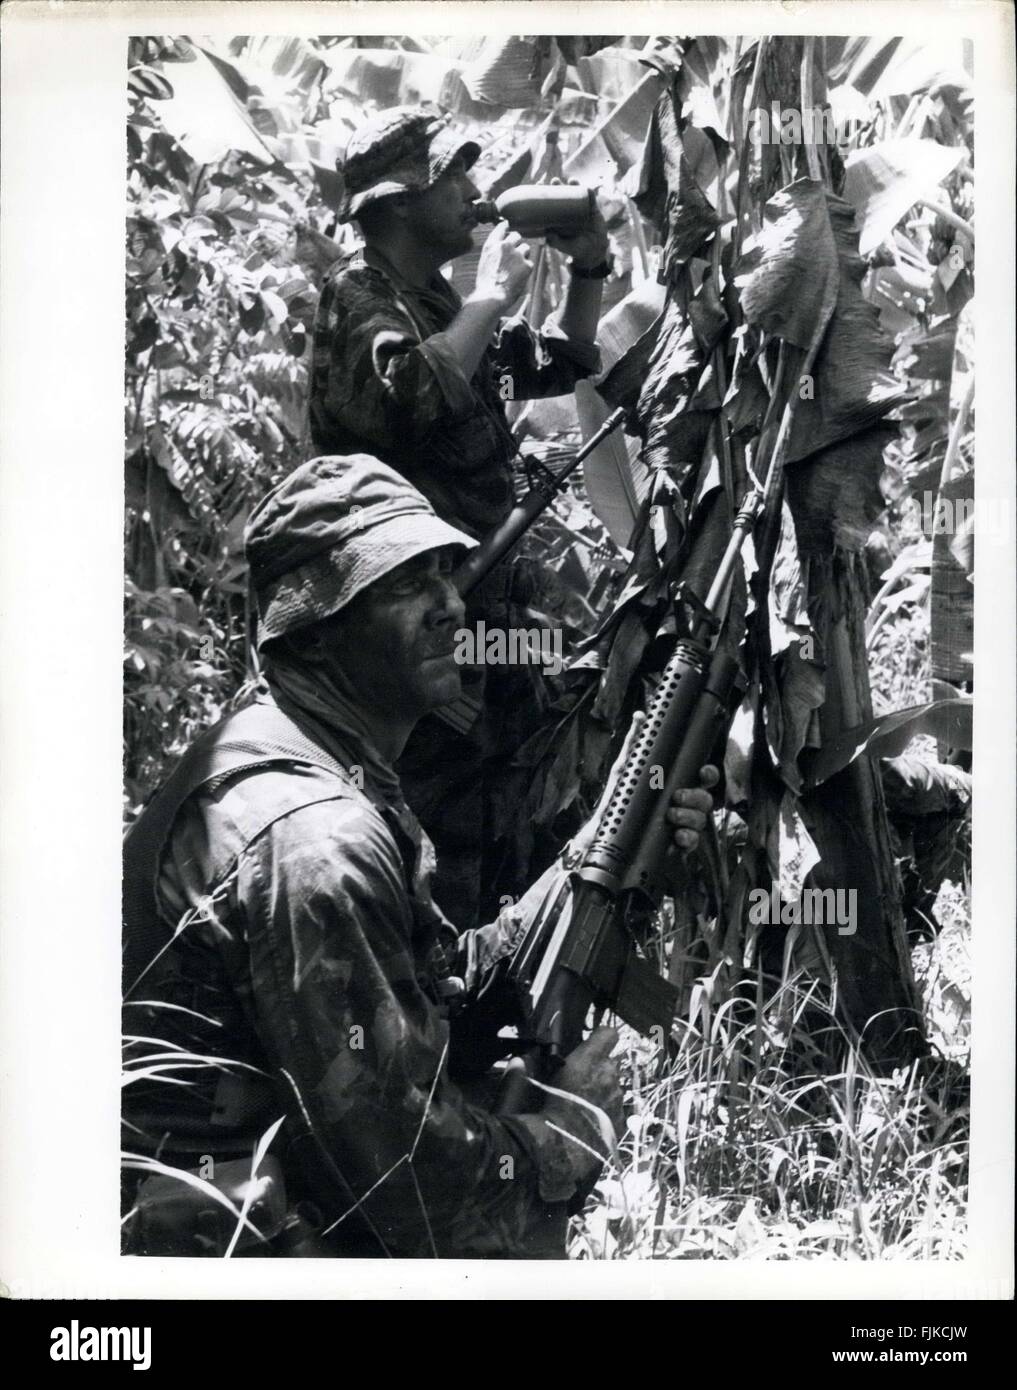 1966 - Phi Dan Dodd; Republic of Vietnam Two US Navy Seals (Sea, Air and Land) pause briefly for a drink of water during operation Crimson Tide, a pre-planned operation in Vinh Binh province 67 miles South West of Saigon. Seals are counter guerilla experts, highly trained in unconventional warfare and Para military operations. This operation resulted in five enemy guerillas killed, and 153 camouflaged structures and fortifications 120 Sampans and 75 destroyed. (Credit Image: © Keystone Pictures USA/ZUMAPRESS.com) Stock Photo